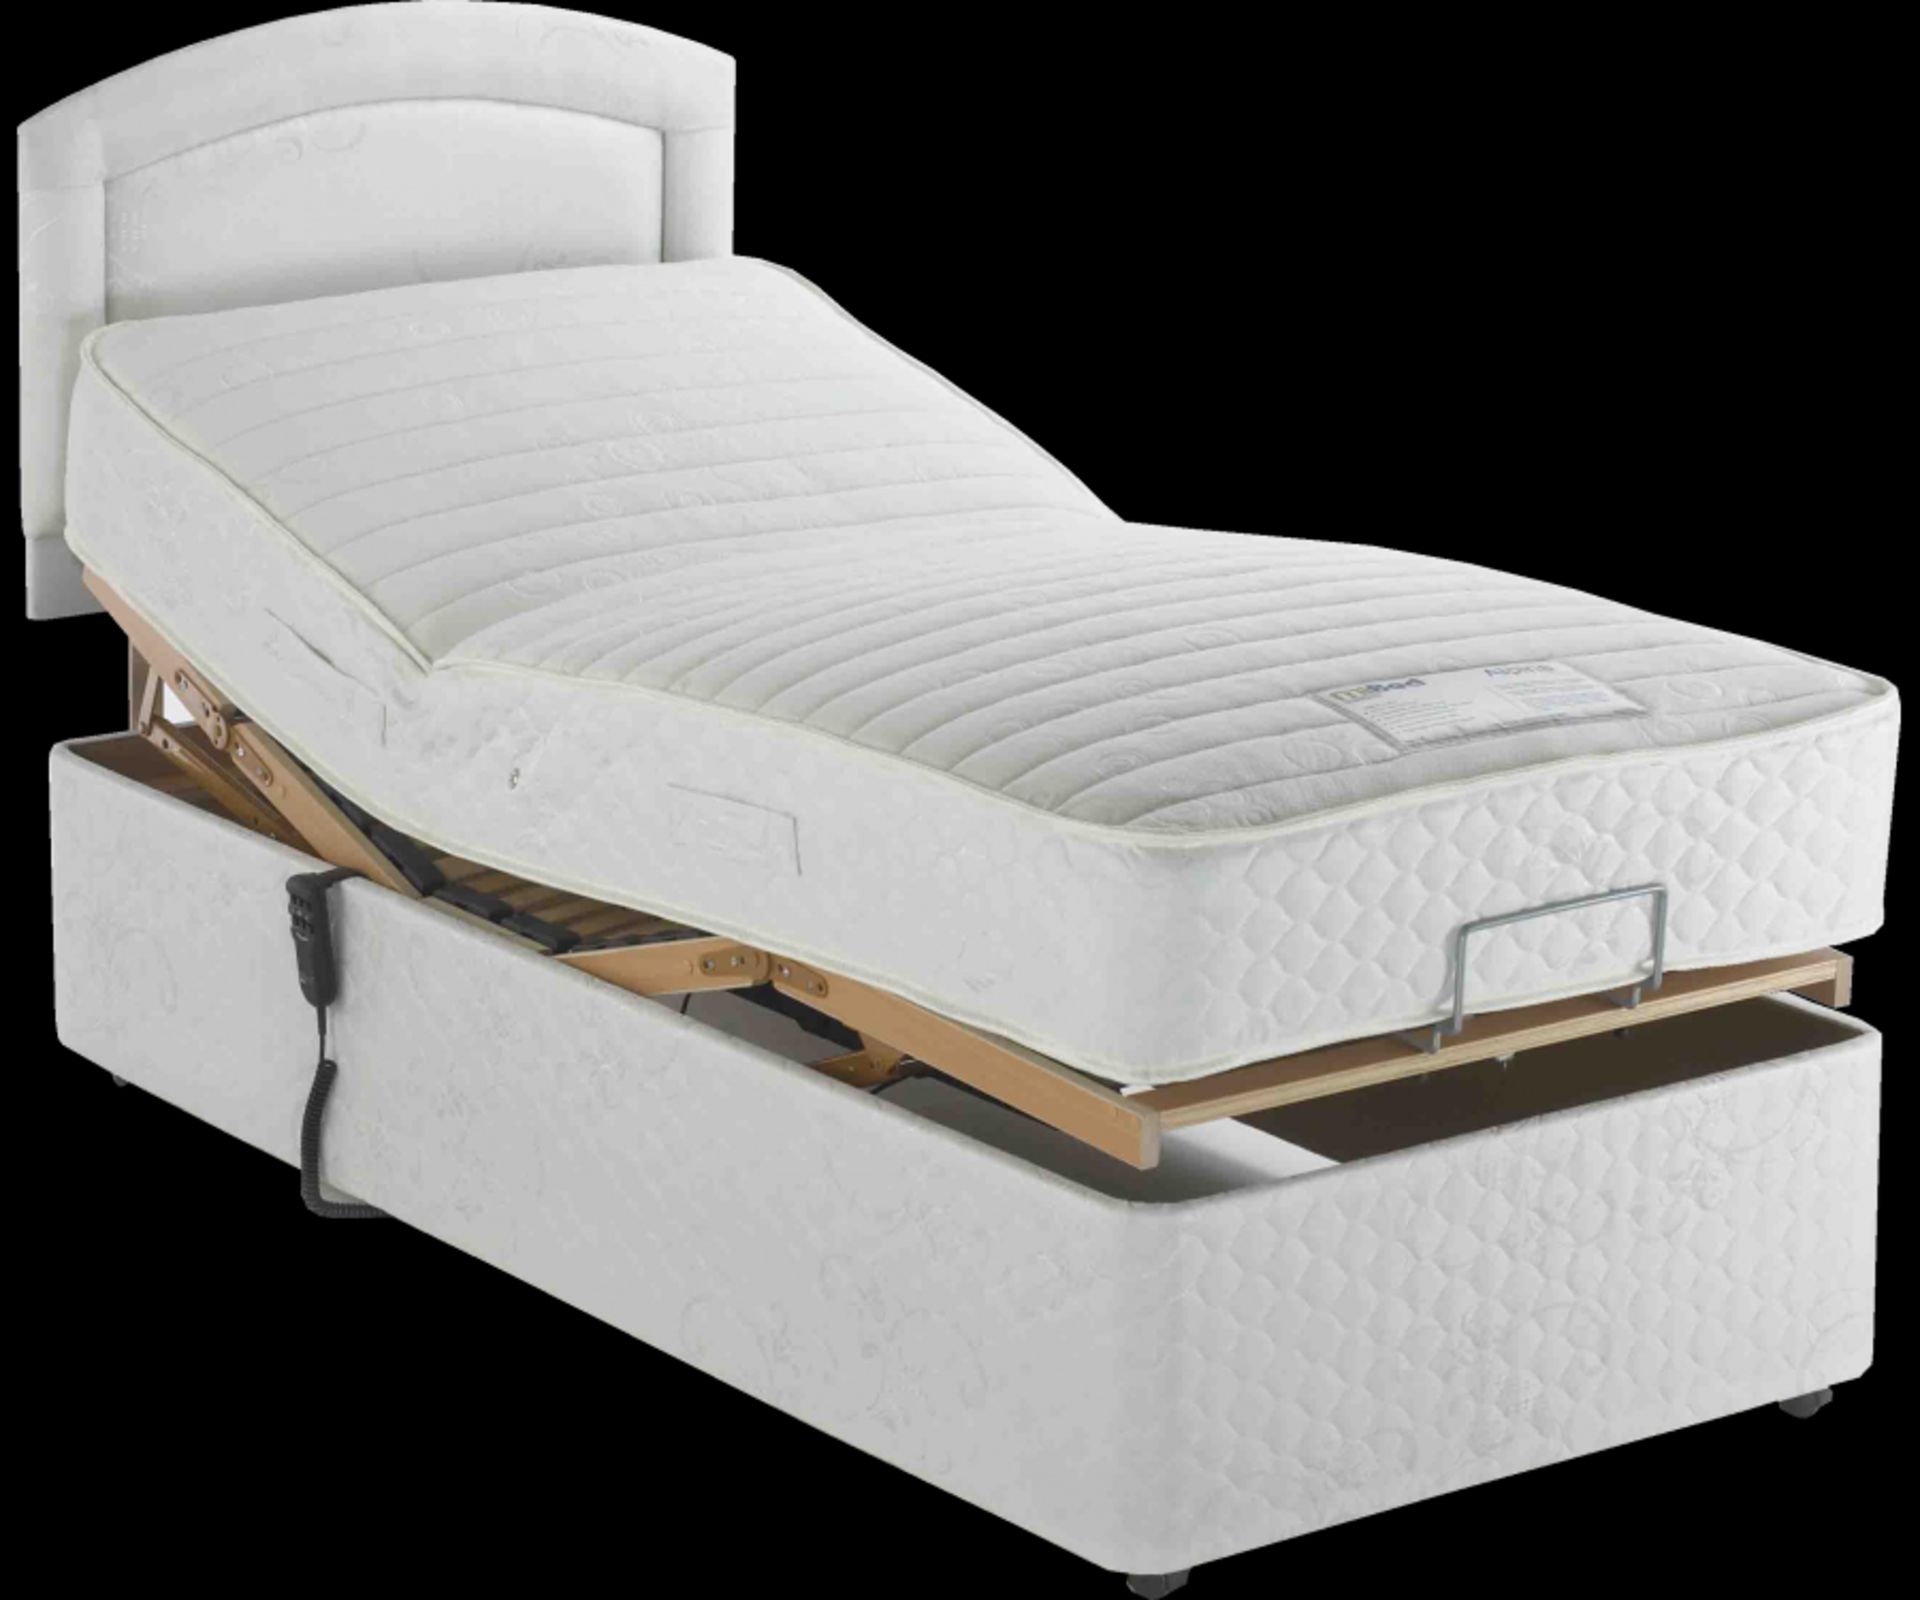 Brand new 3'0 (single) electric adjustable bed with luxury pocket sprung mattress - Image 2 of 2